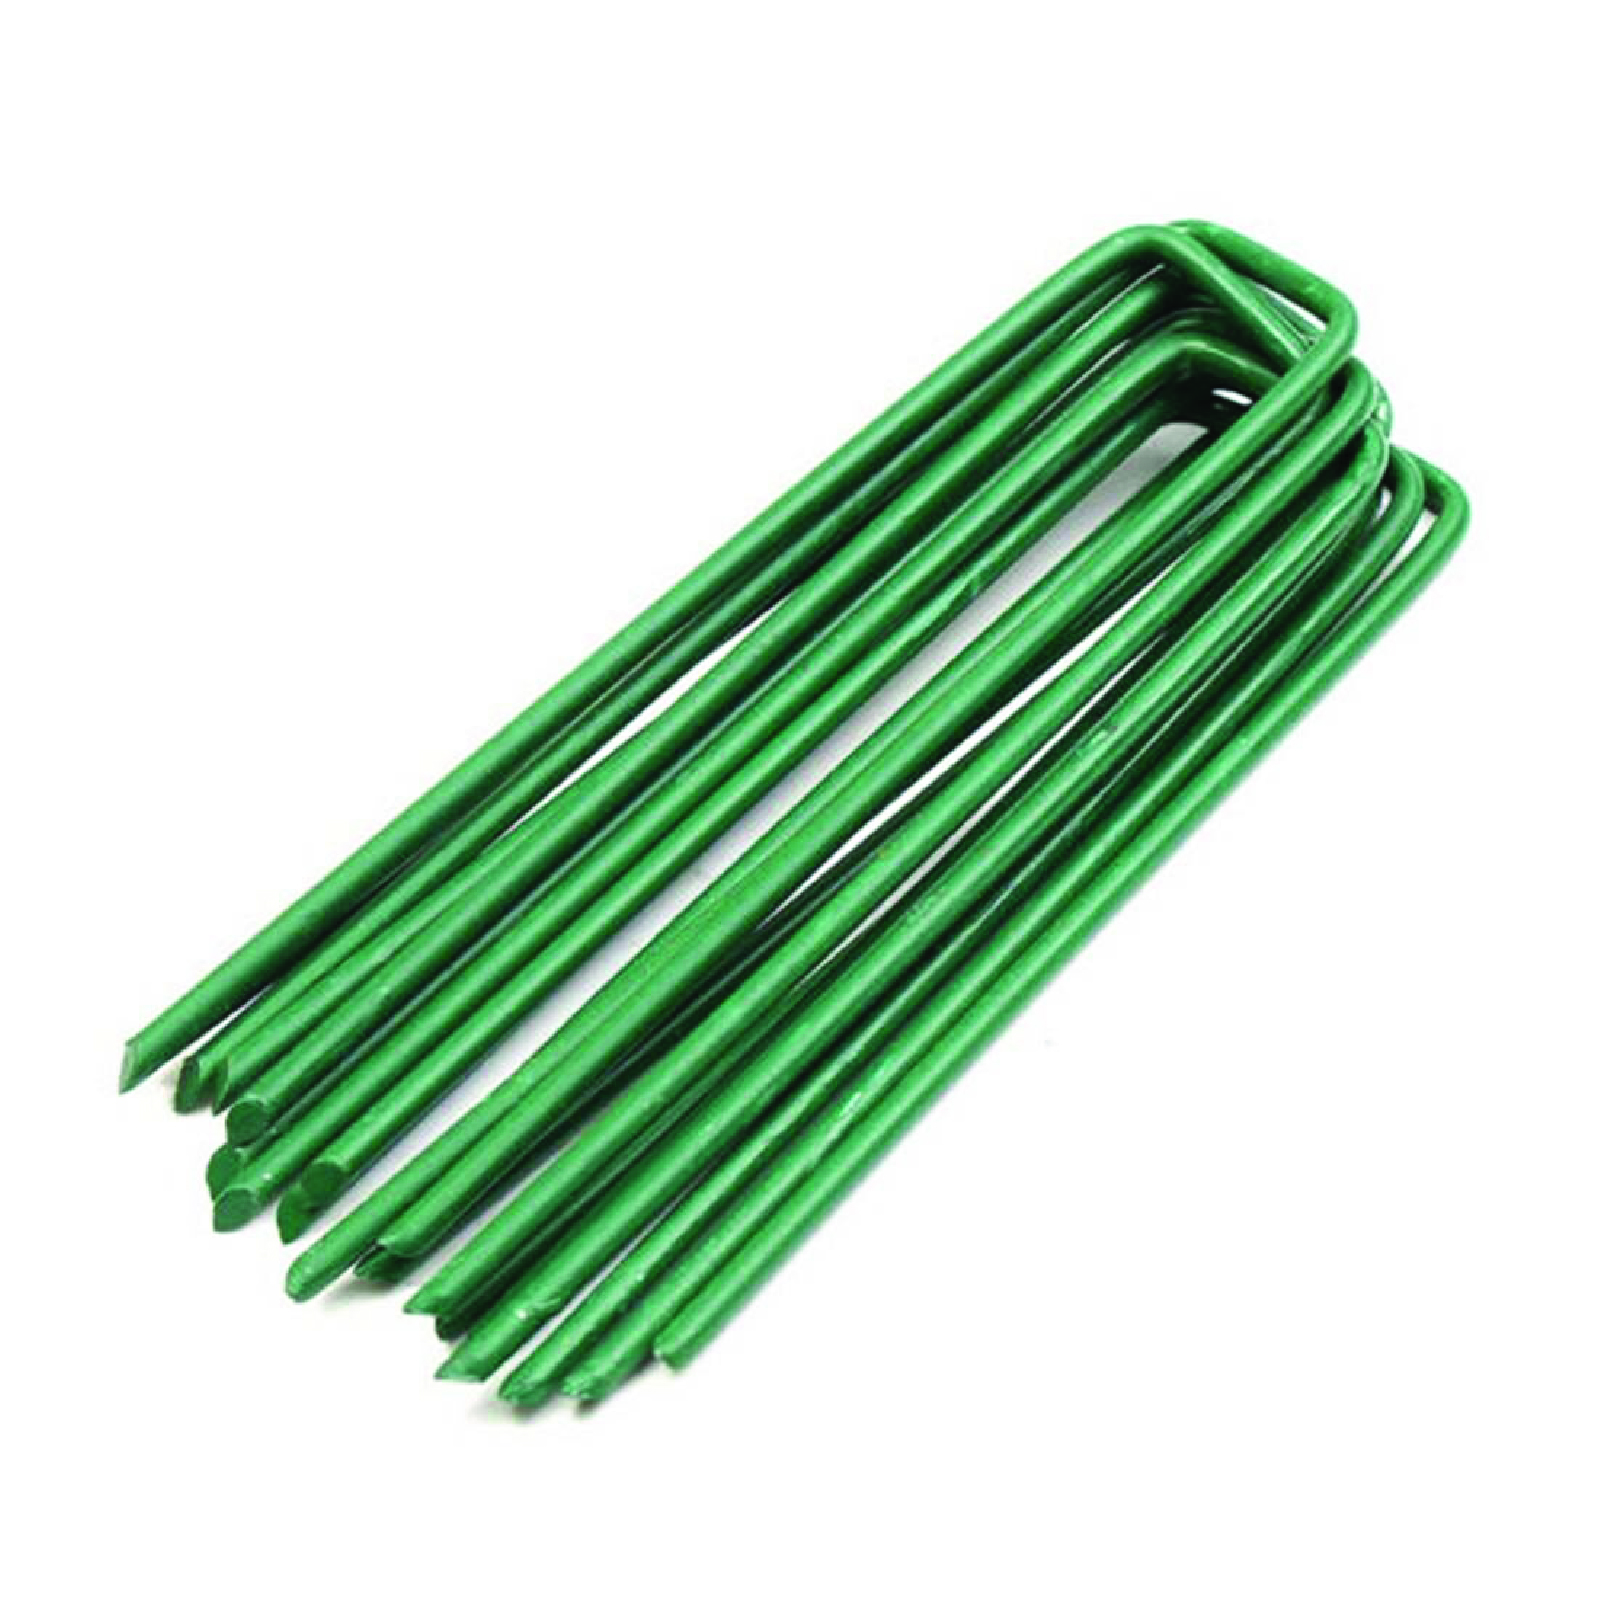 U pins for synthetic turf